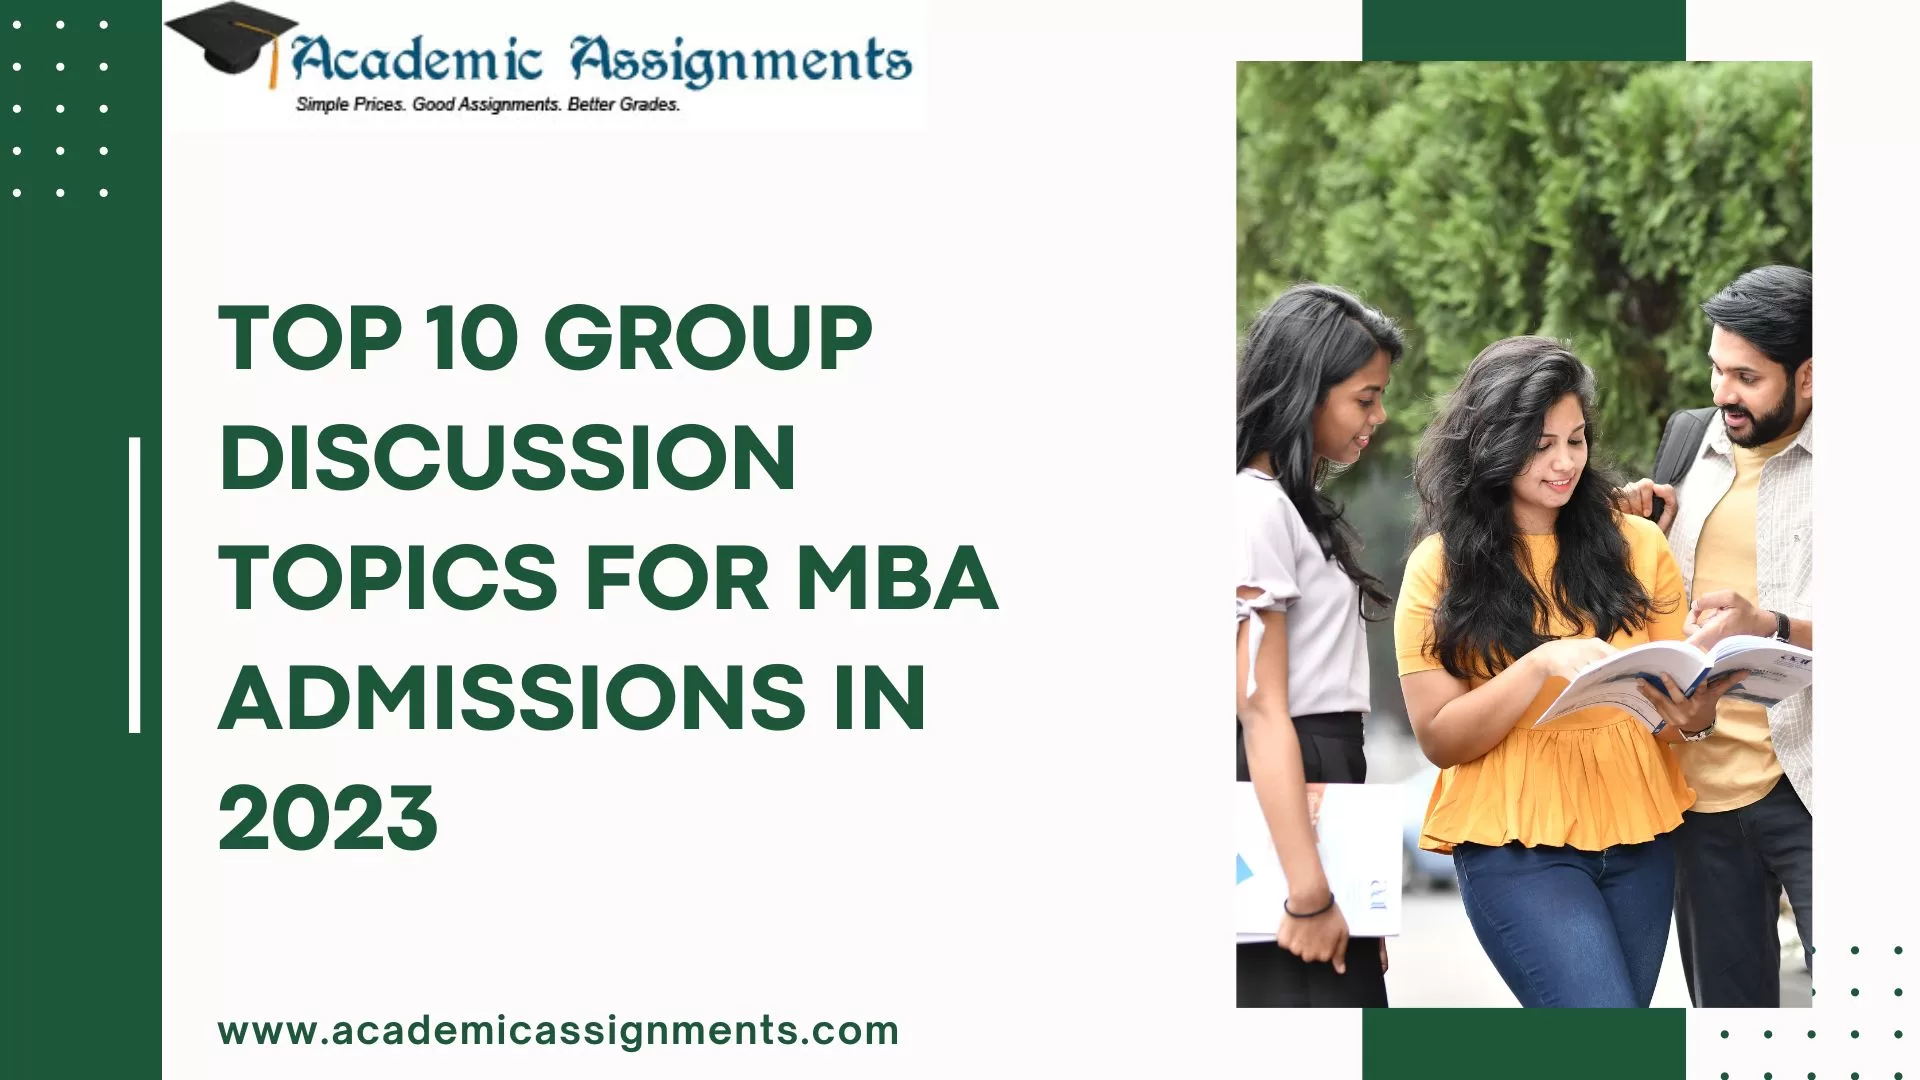 Top 10 Group Discussion Topics for MBA Admissions in 2023